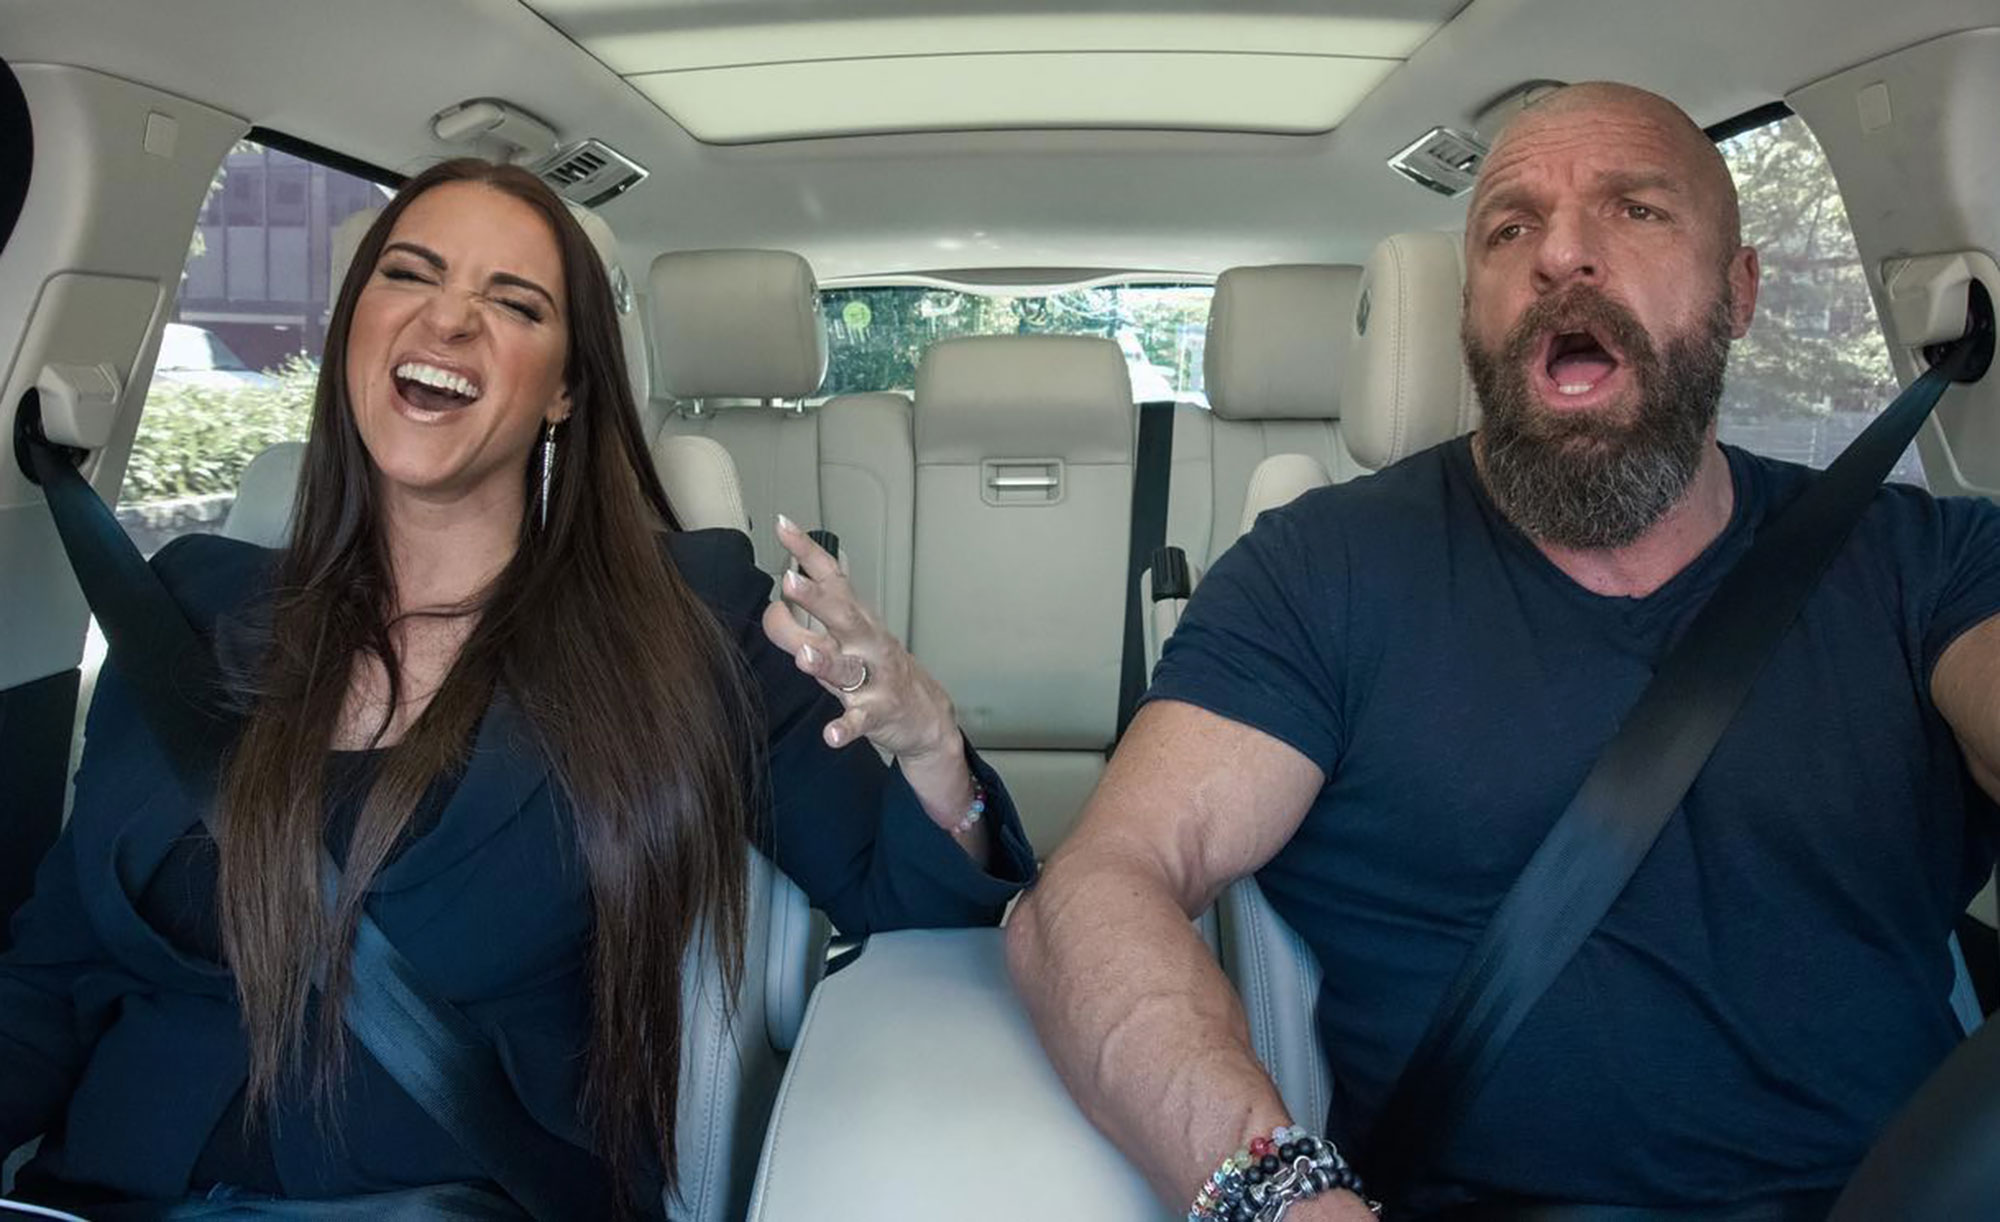 20 Less Than Flattering Facts About Triple H And Stephanie McMahon's  Relationship